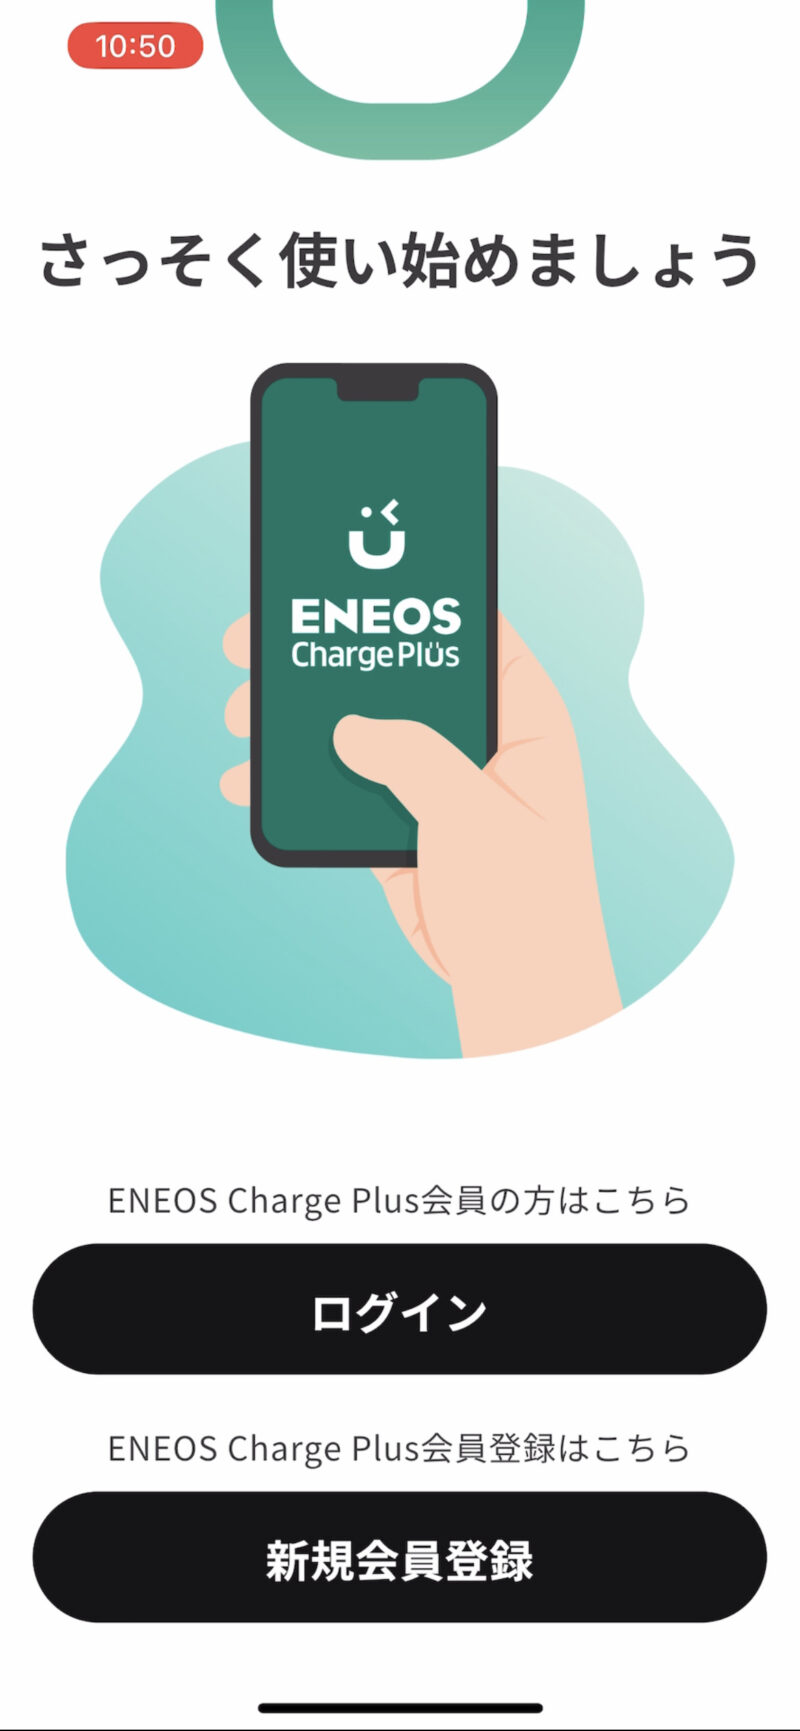 ENEOS Charge Plus初回ログイン画面